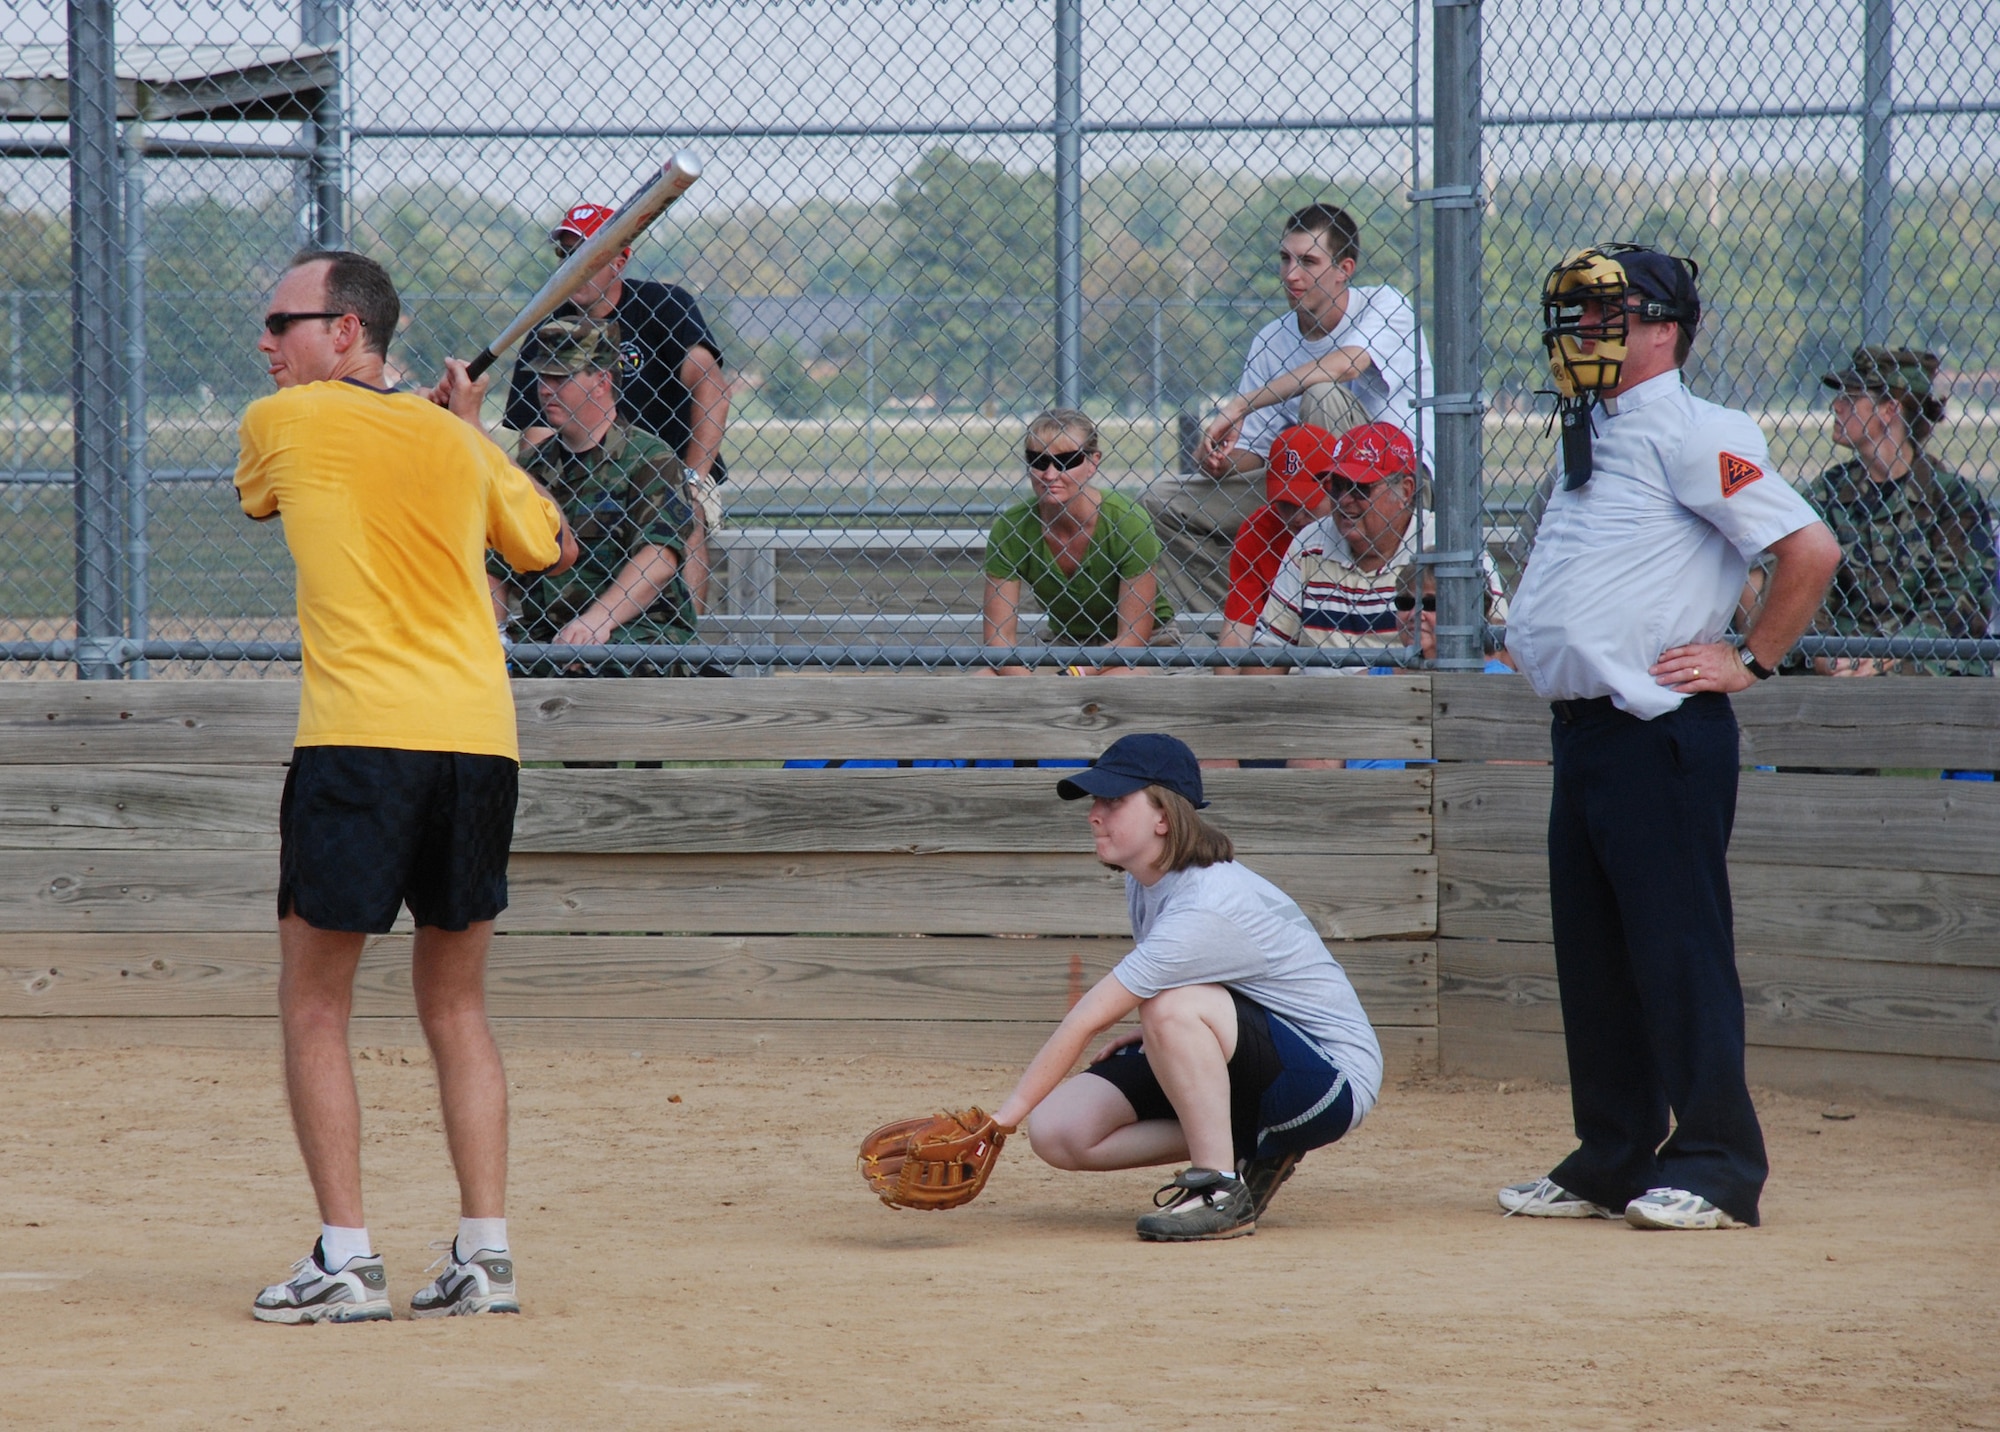 Hey there batter!  Chaplain Bell of the 932nd Airlift Wing prepares as a referee to see the first pitch at the recent softball match.